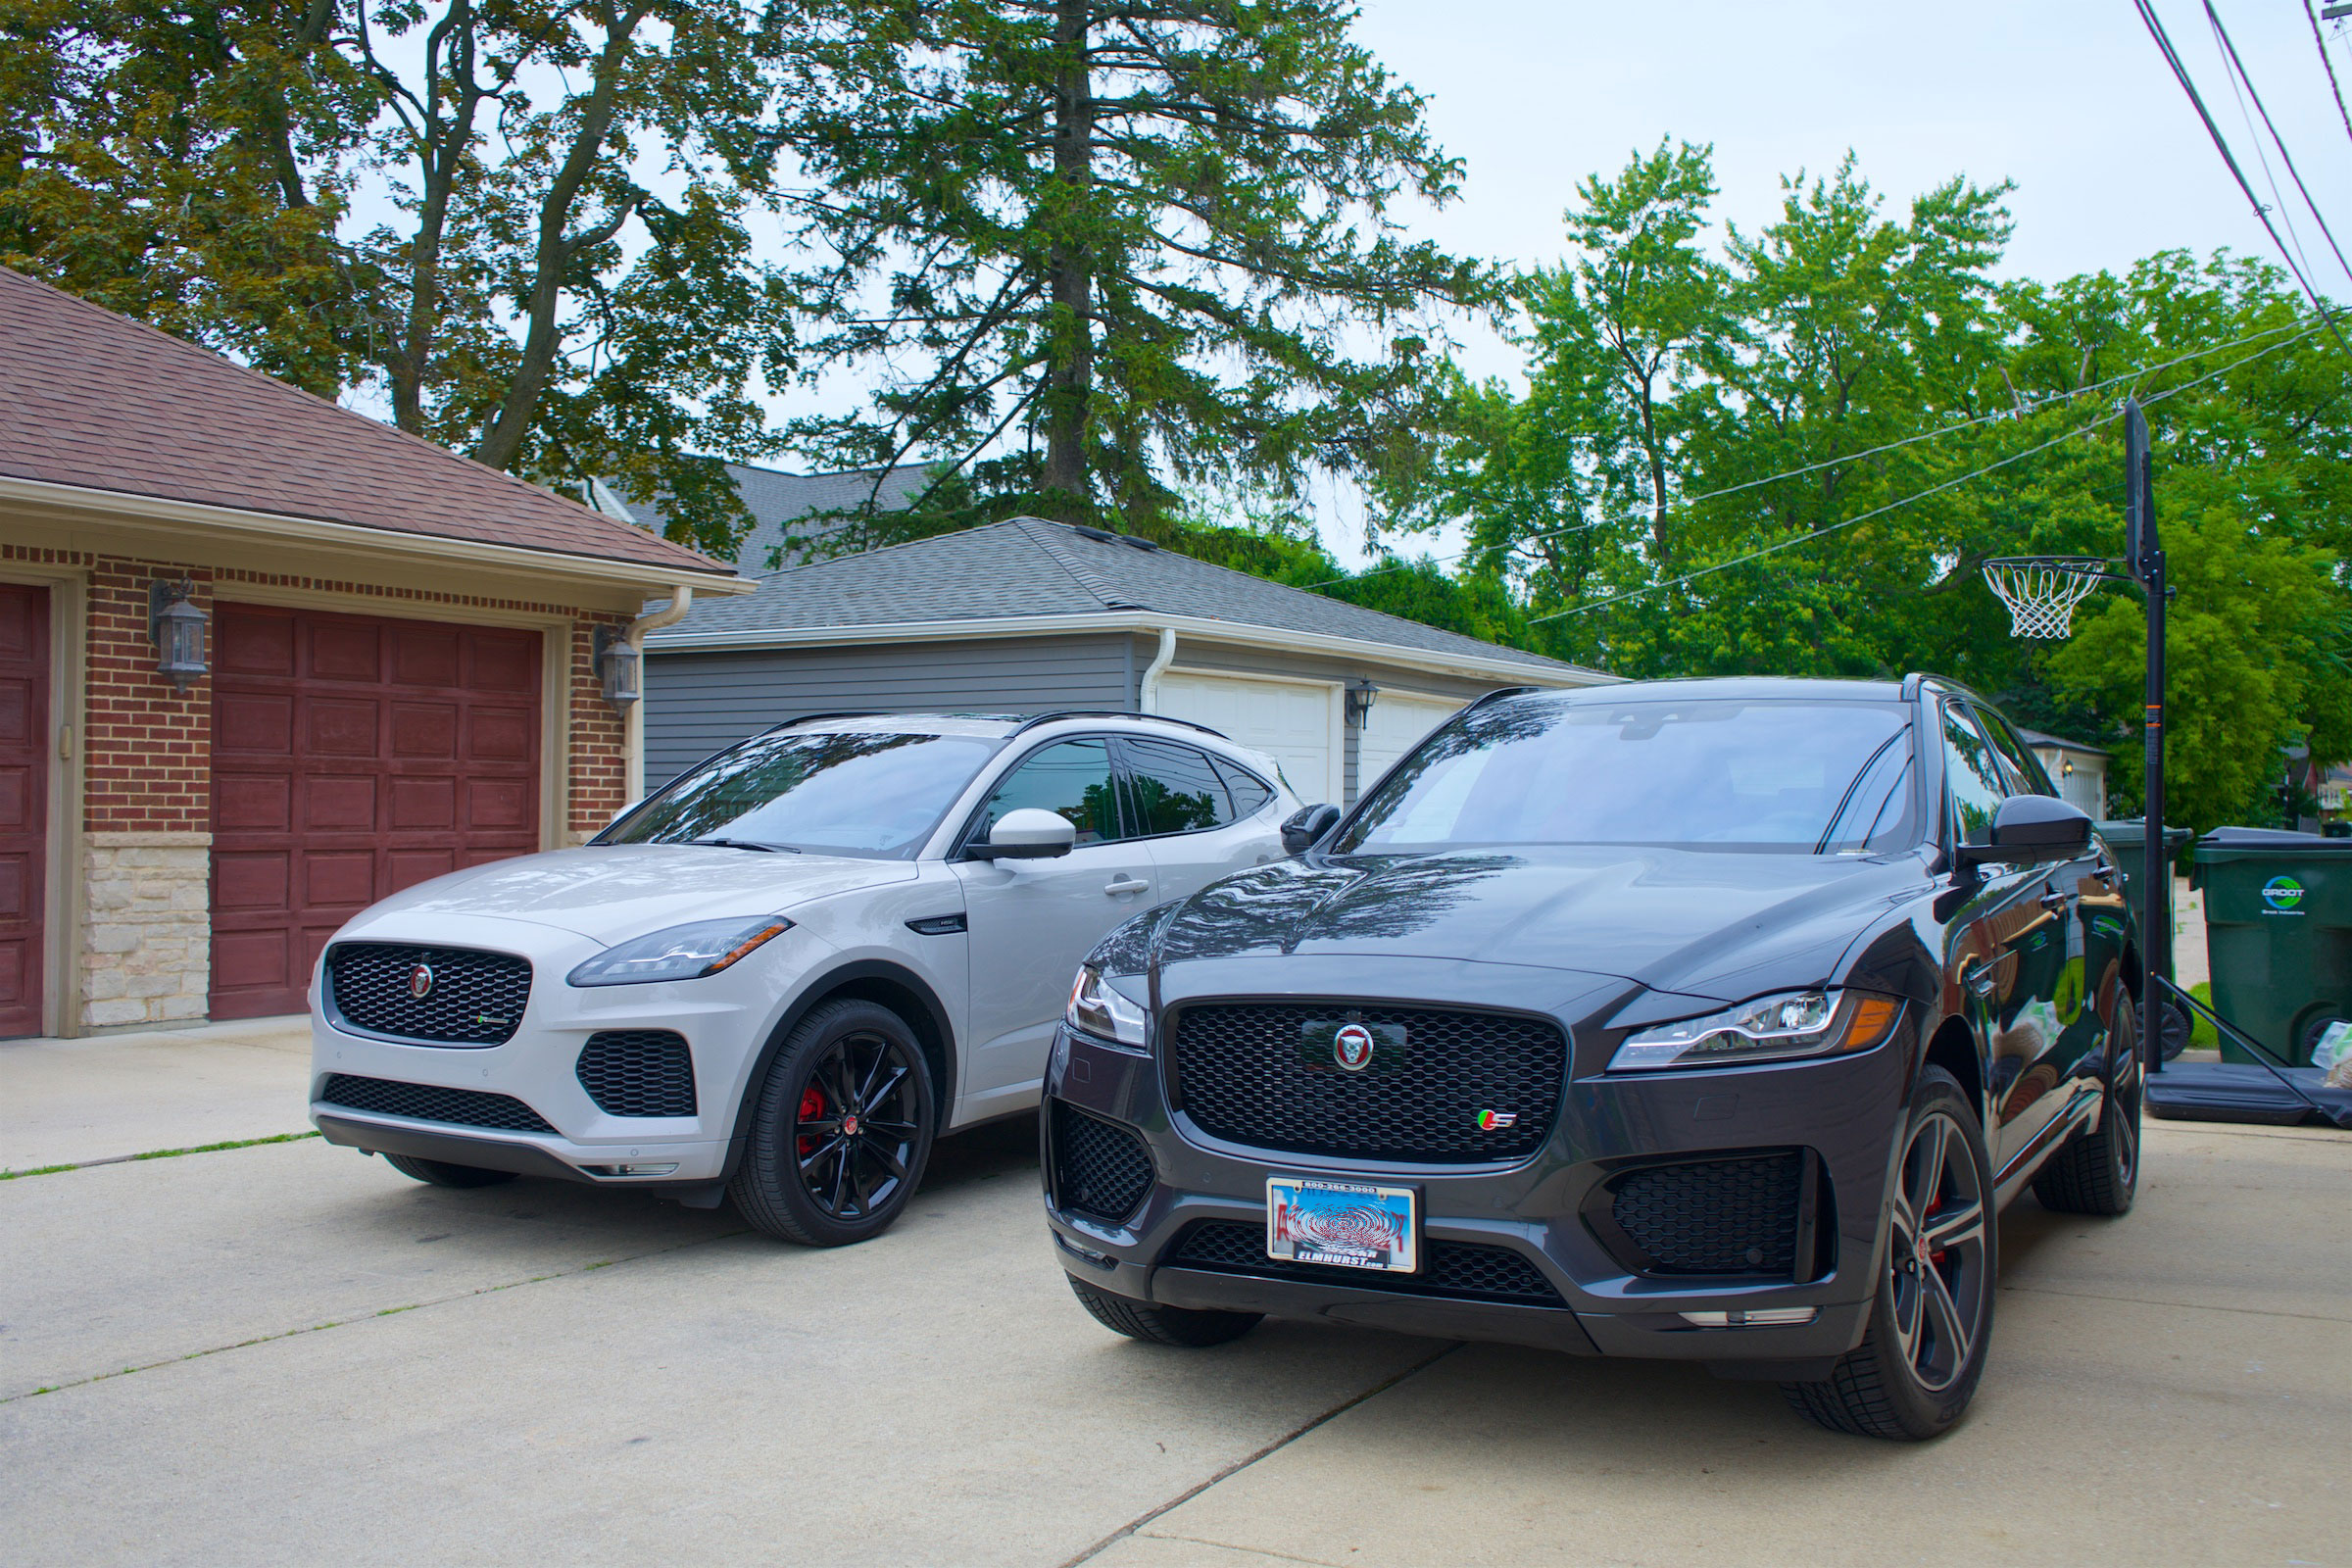 A car in SUV clothing: The Jaguar E-Pace reviewed Ars Technica